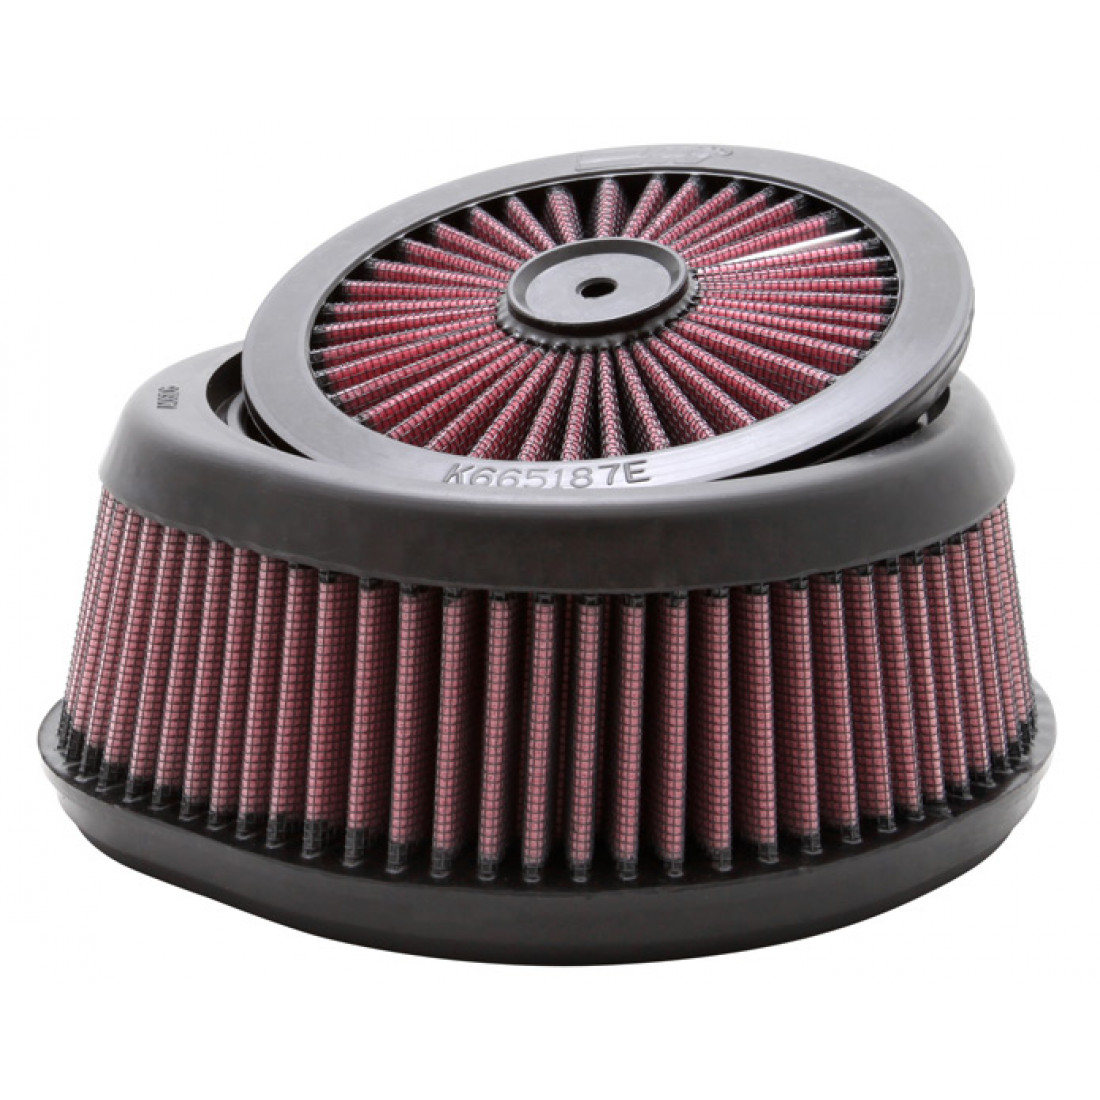 K&N Air Filter for YAMAHA YZ250F YZ450F 9709 RM125 250 0608, EXTREME